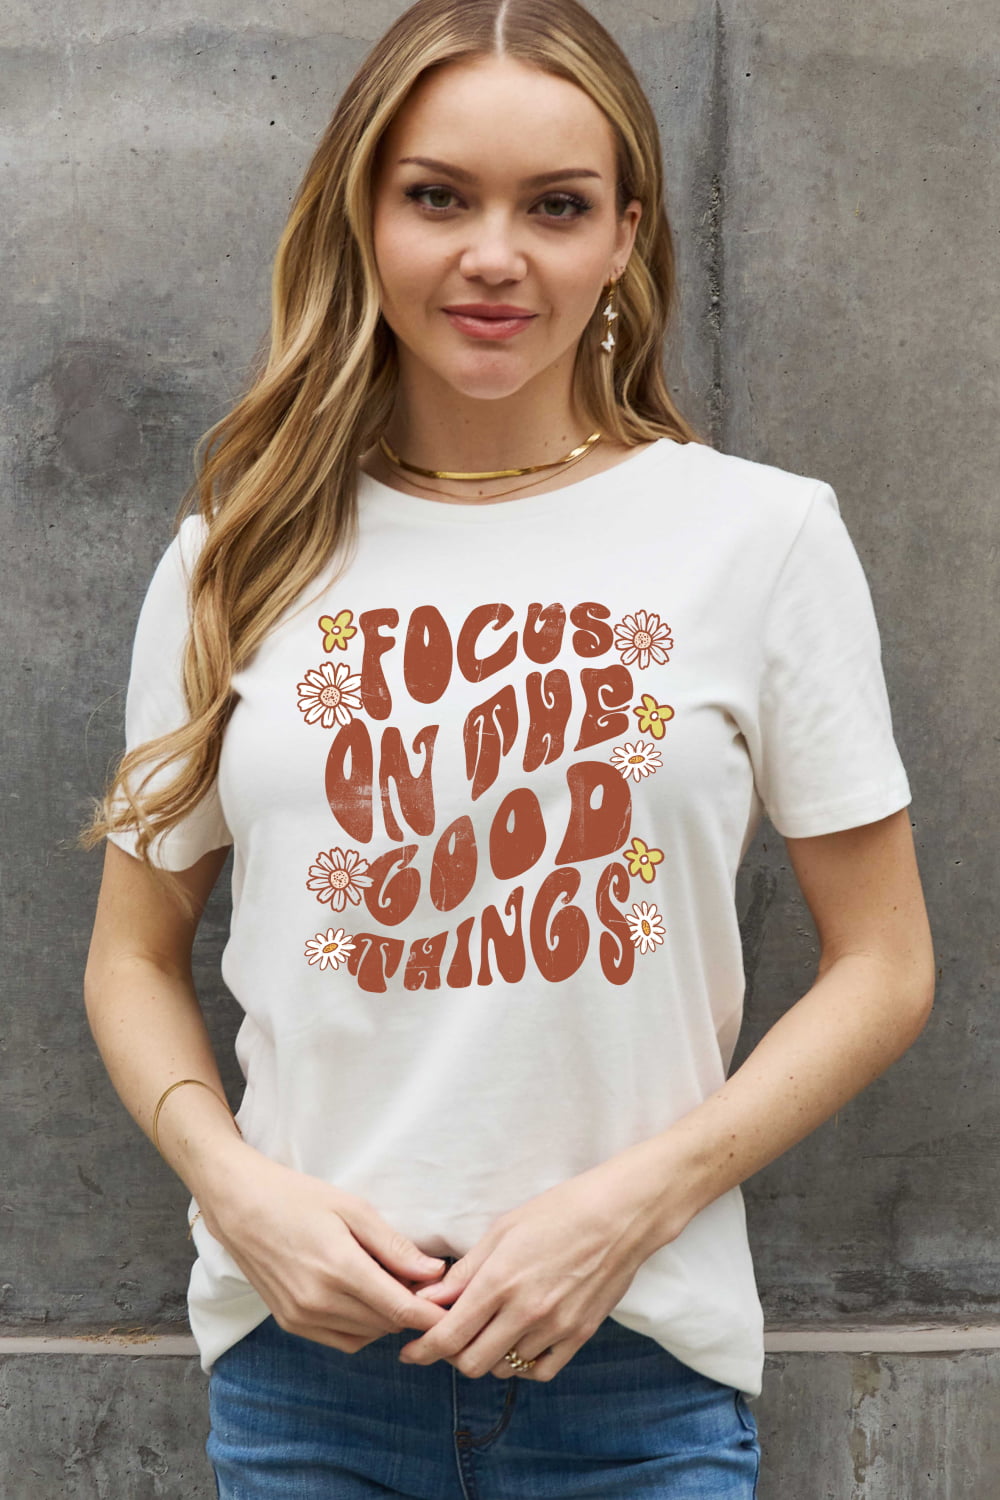 FOCUS ON THE GOOD THINGS Graphic Cotton Tee - T-Shirts - Shirts & Tops - 3 - 2024